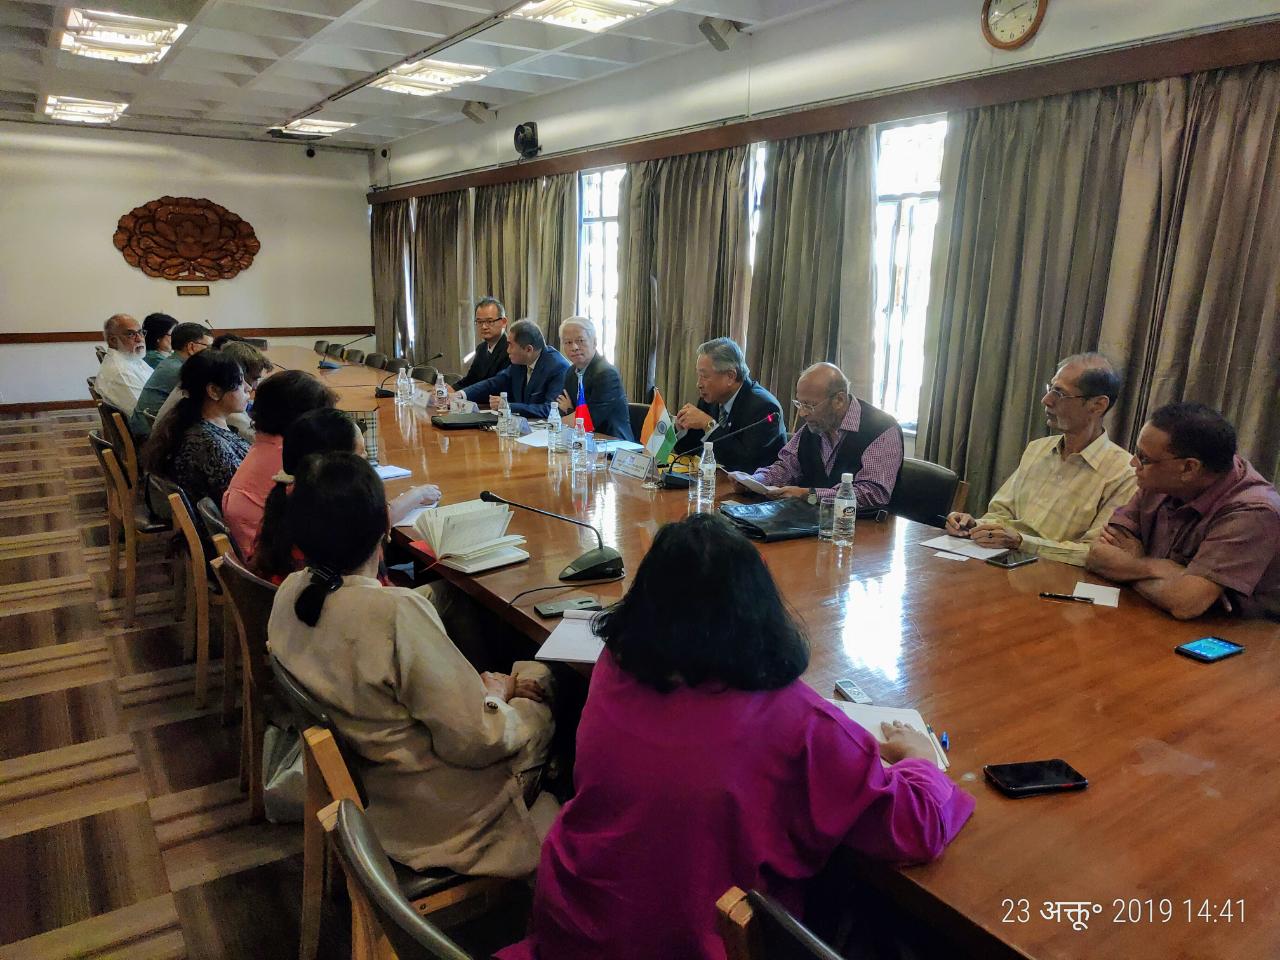 TECC Representative Amb. Tien, at the invitation of the Indian Association of Foreign Affairs Correspondents, speaks of recent developments in Taiwan-India relationship at the India International Center on Oct. 23, 2019.